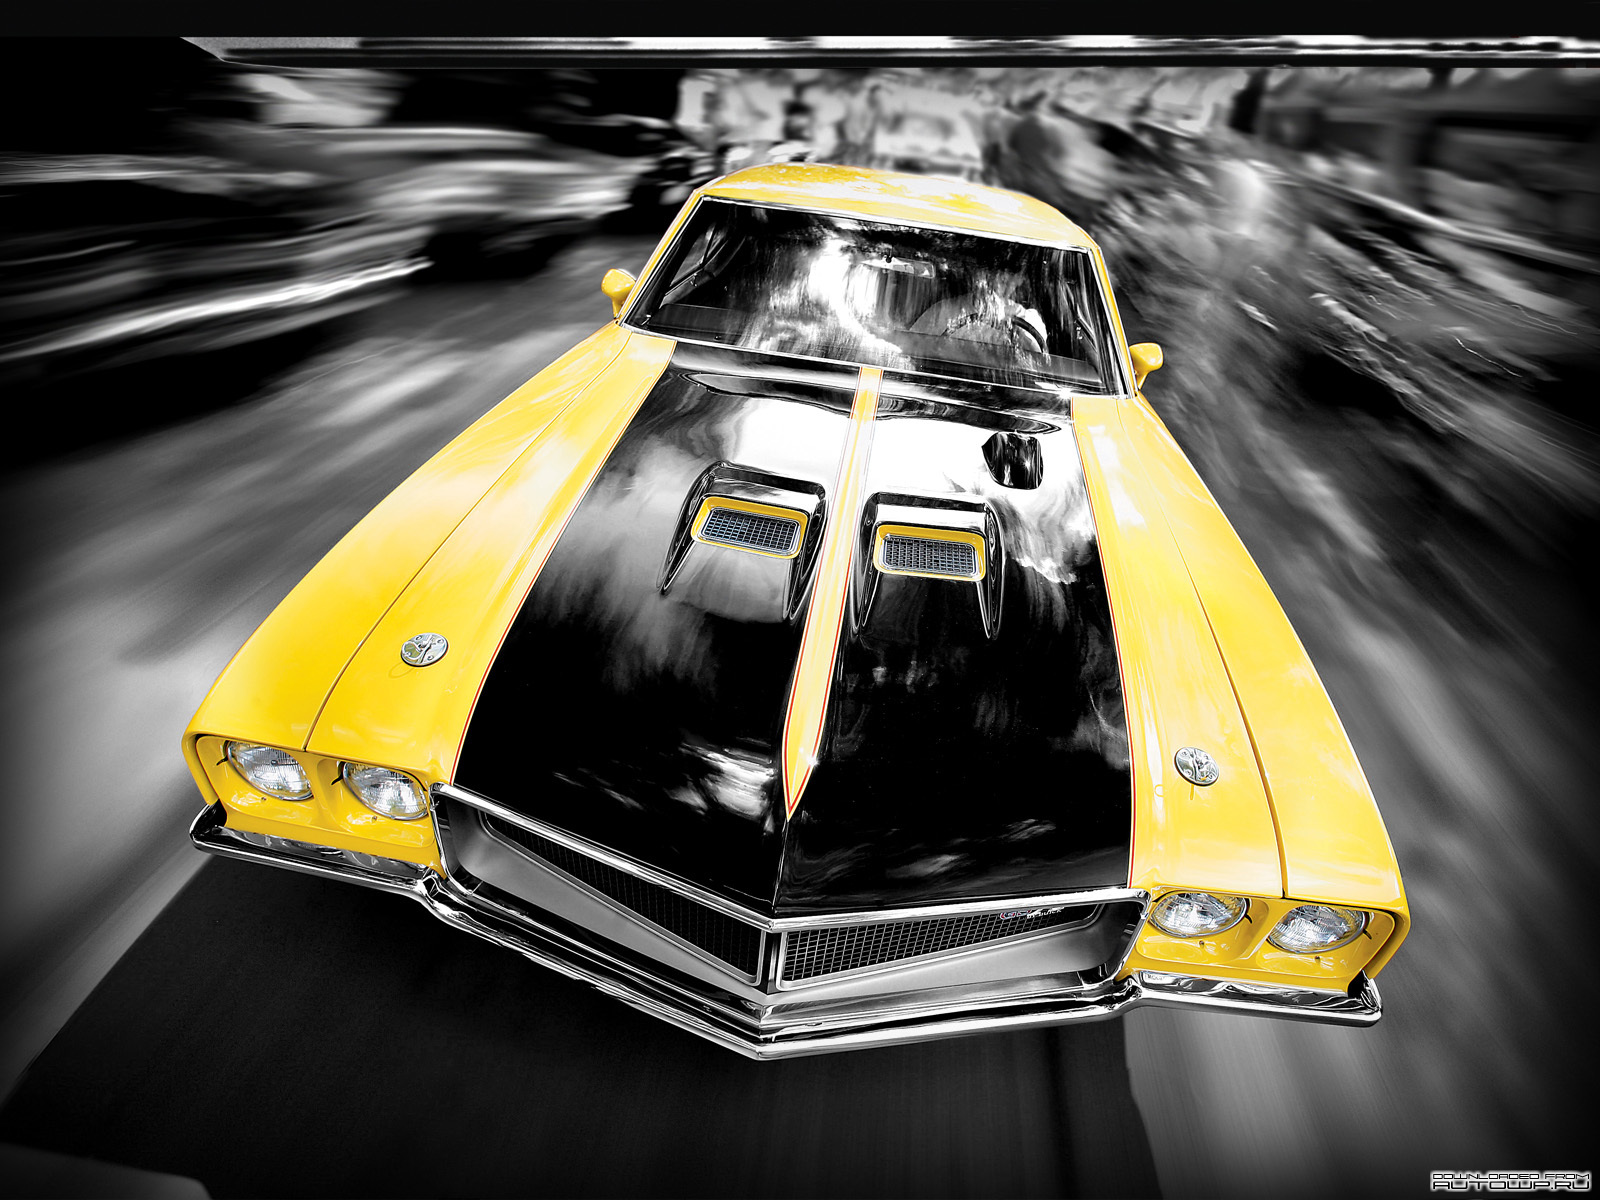 Car 3d Wallpaper For Android